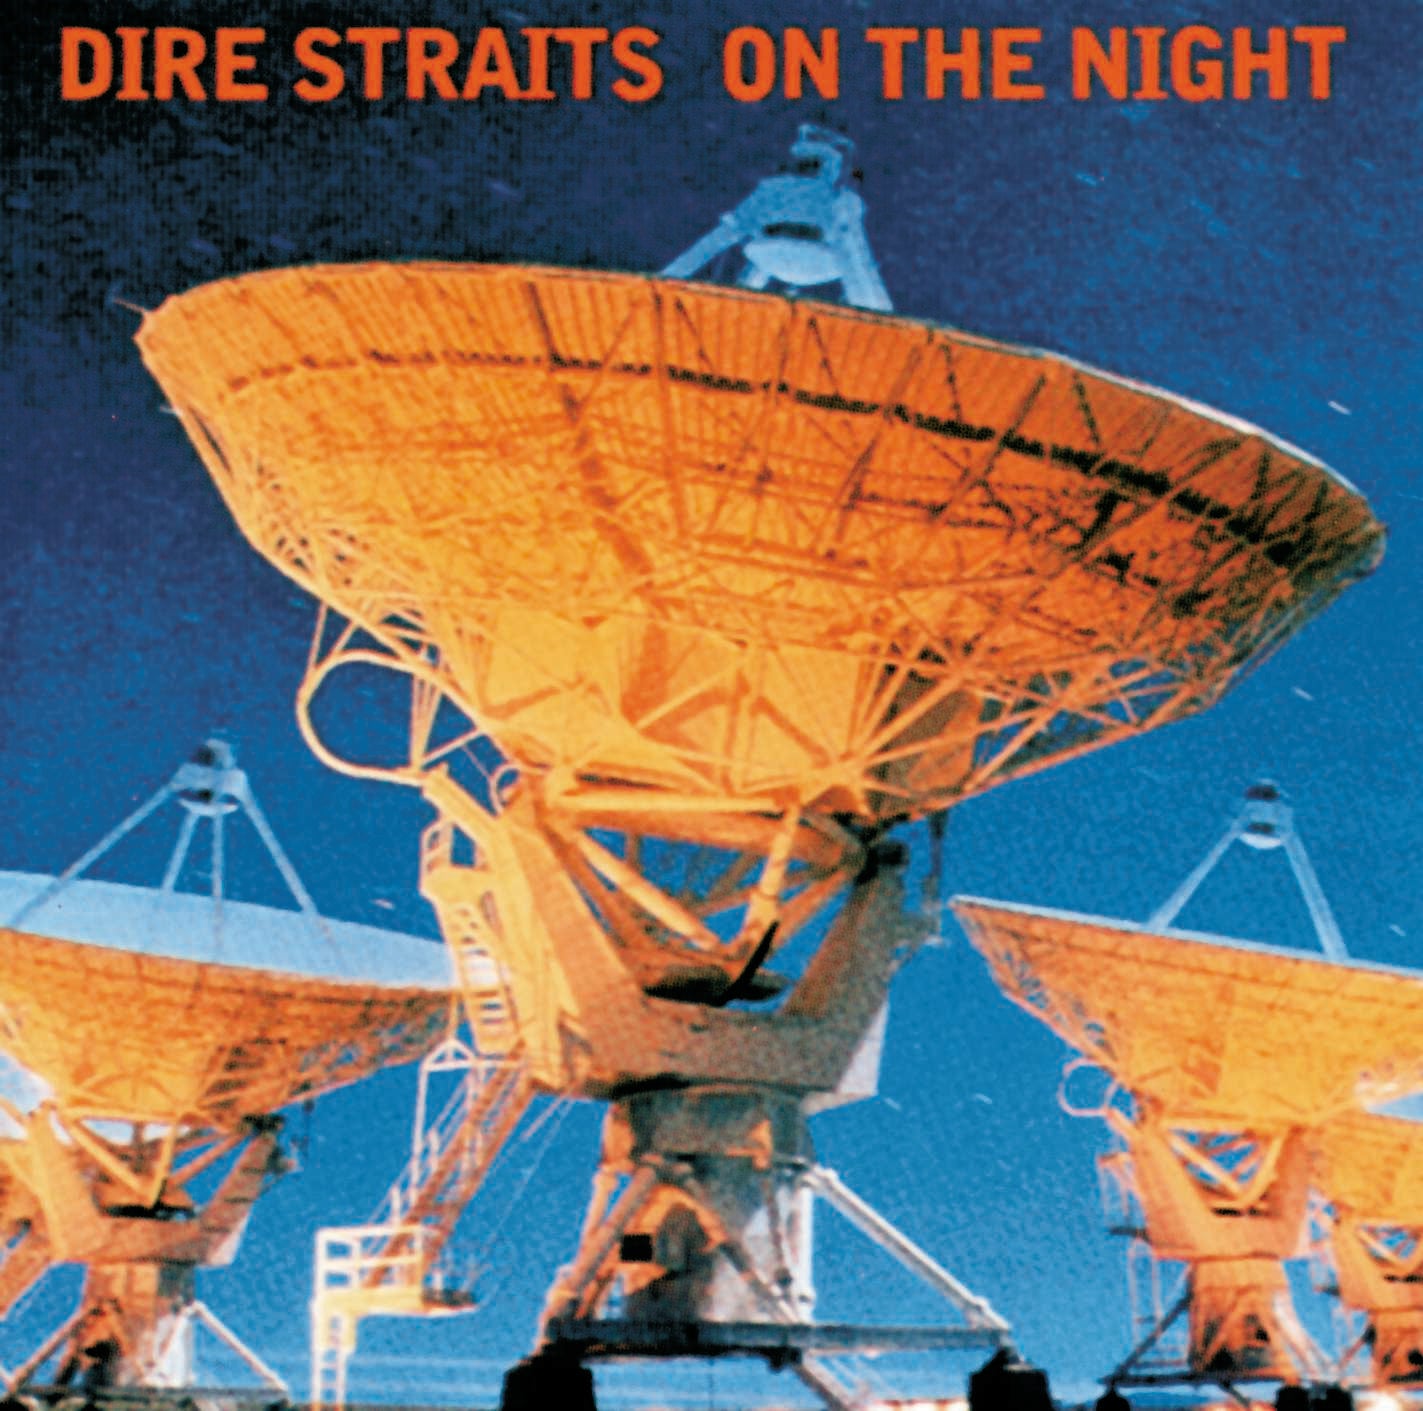 On The Night - Dire Straits 